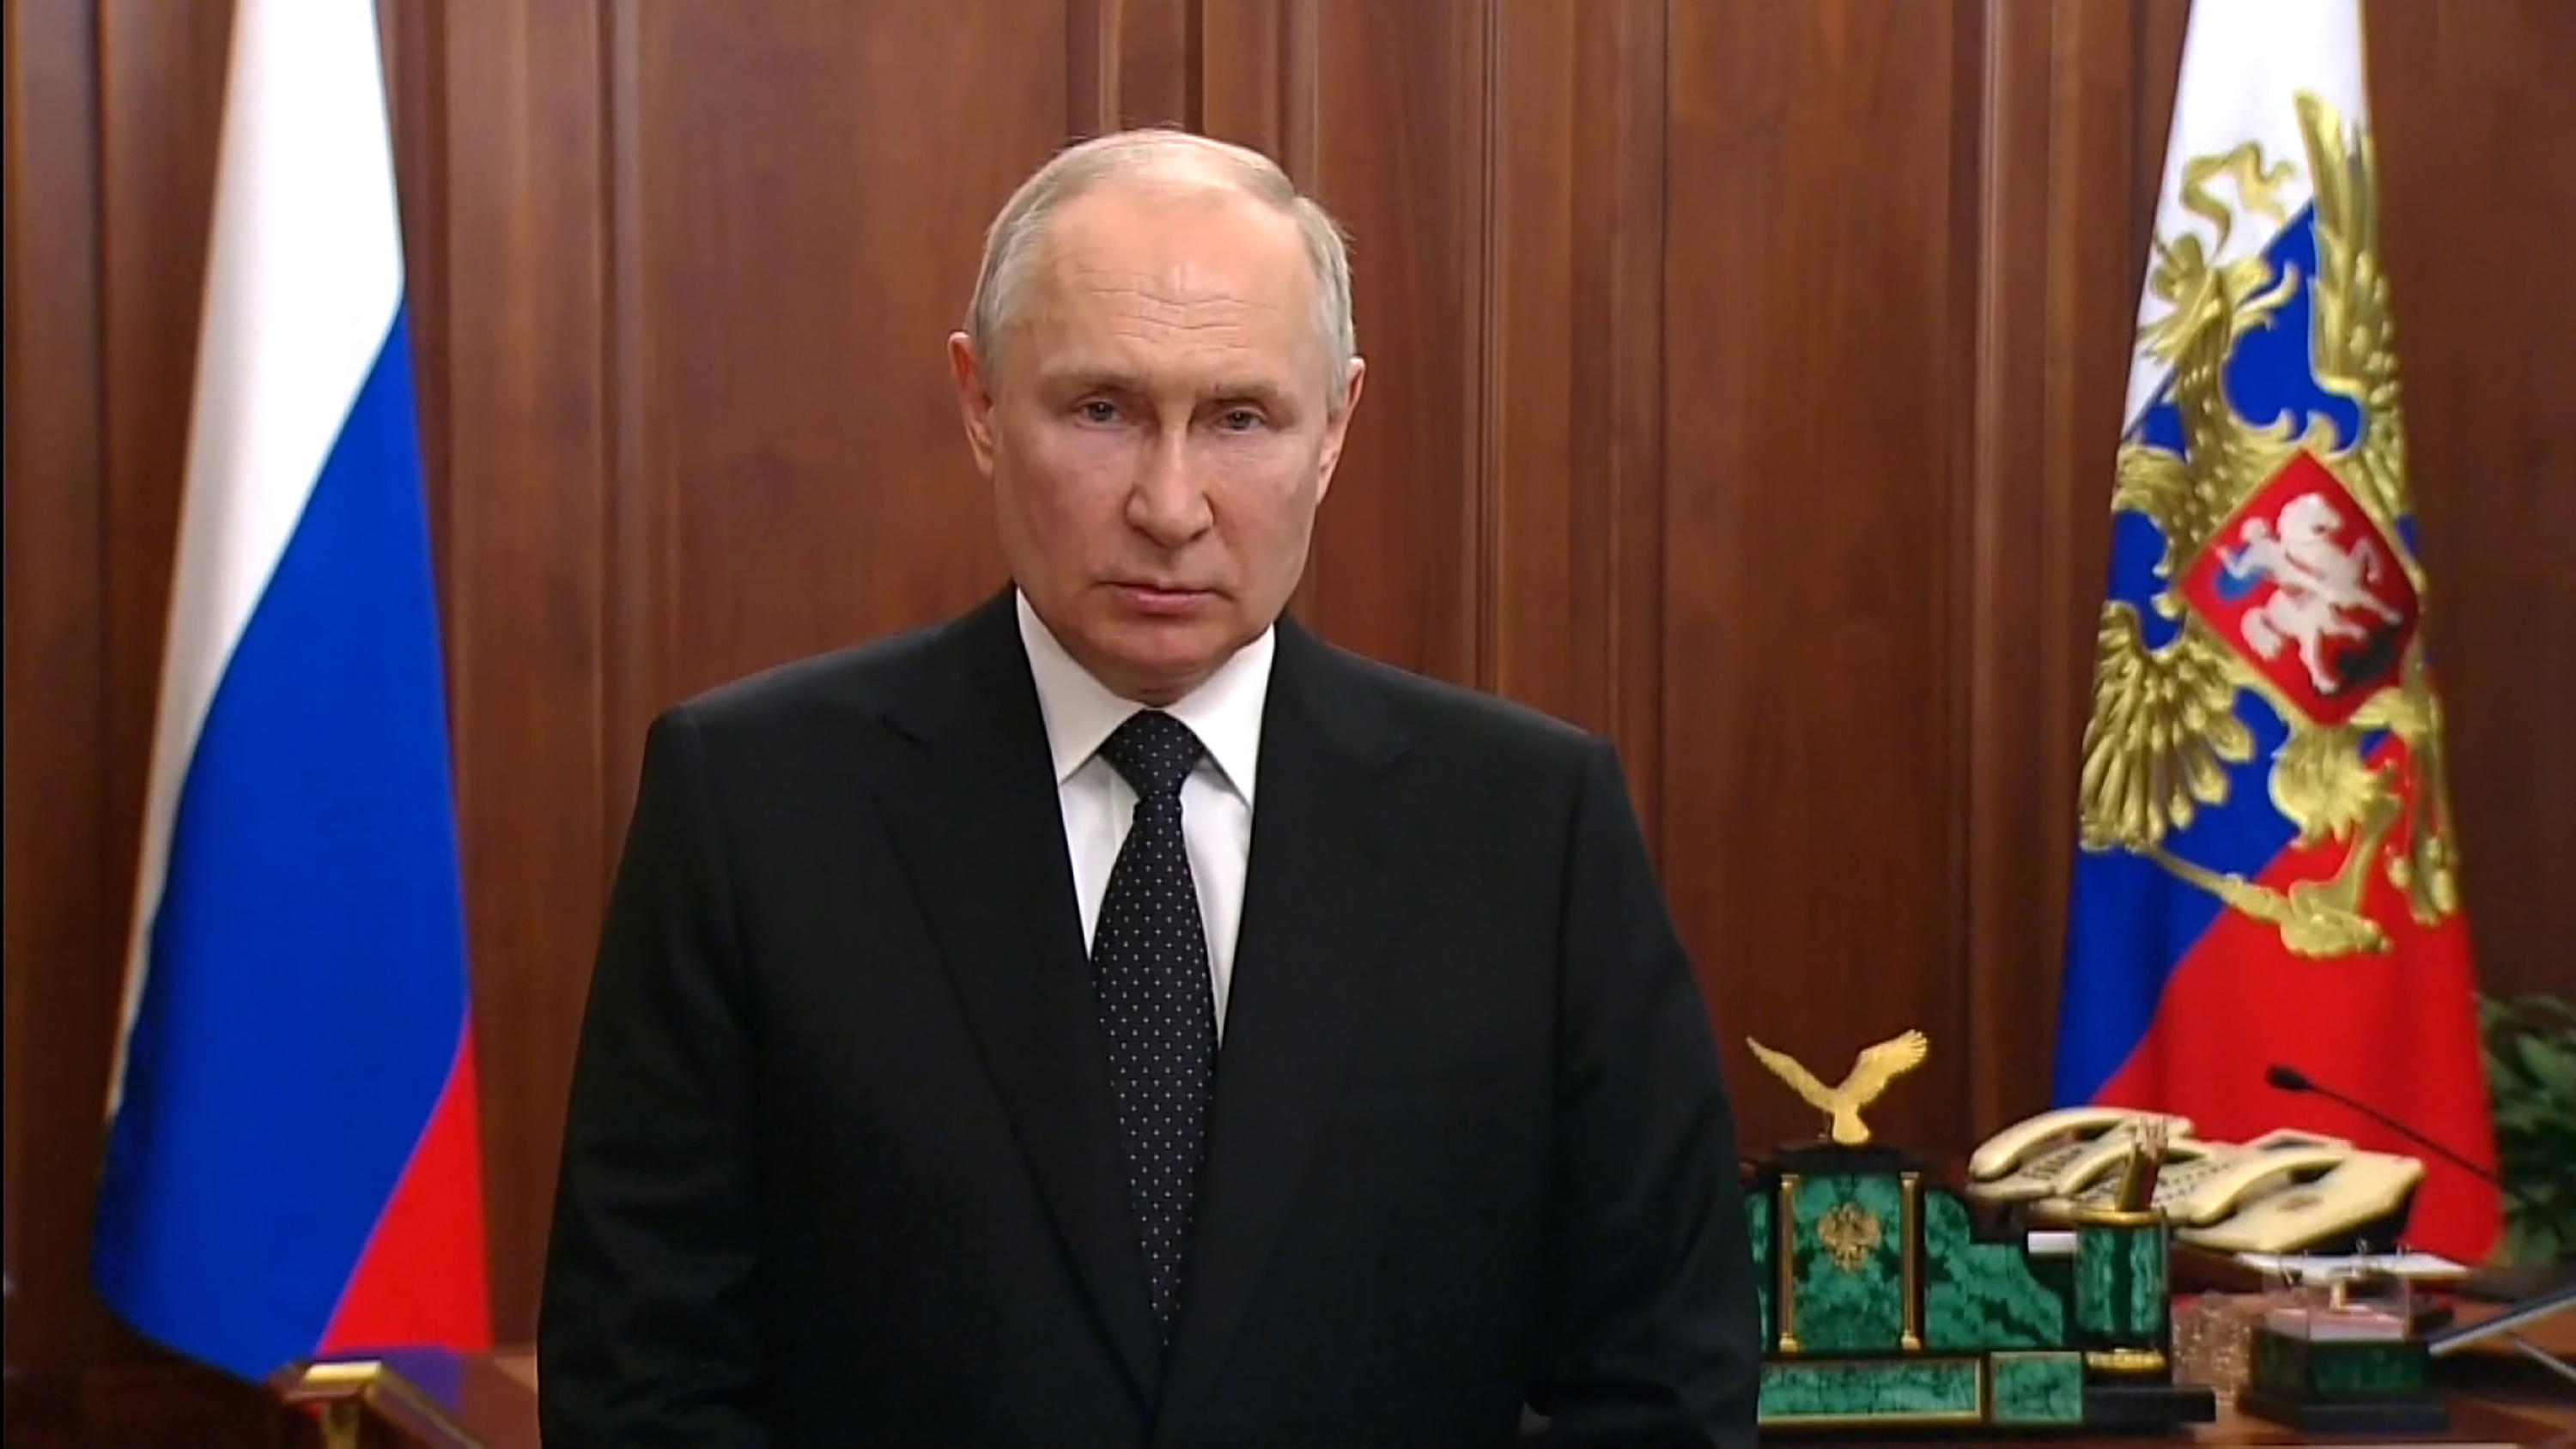 Russian President Vladimir Putin gives a televised address in Moscow, Russia, June 24.